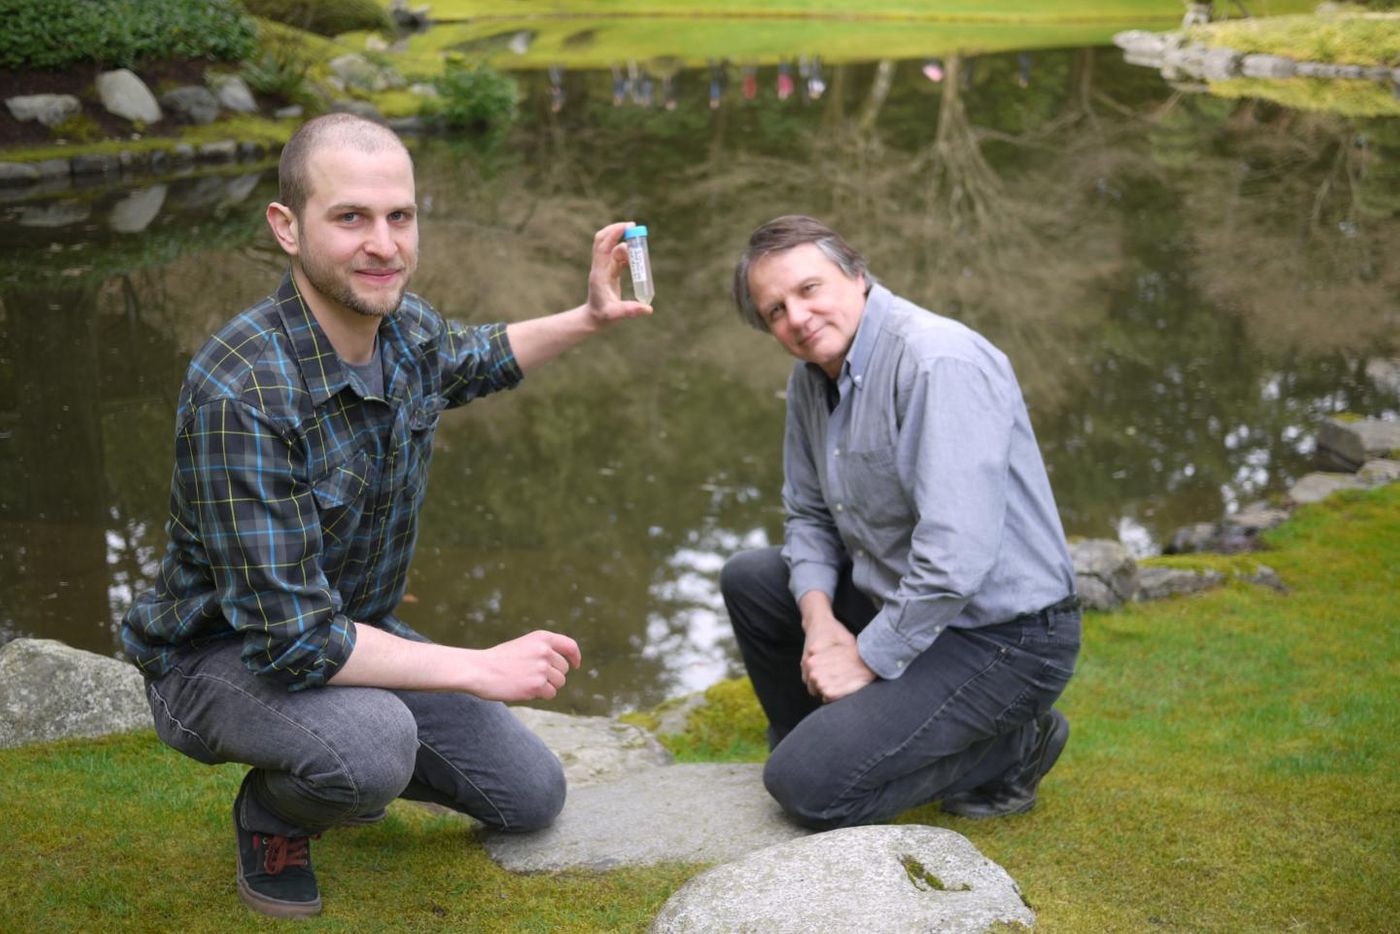 Christoph Deeg and Curtis Suttle isolated Bodo saltans virus in samples from UBC's Nitobe Memorial Garden. / Credit: University of British Columbia